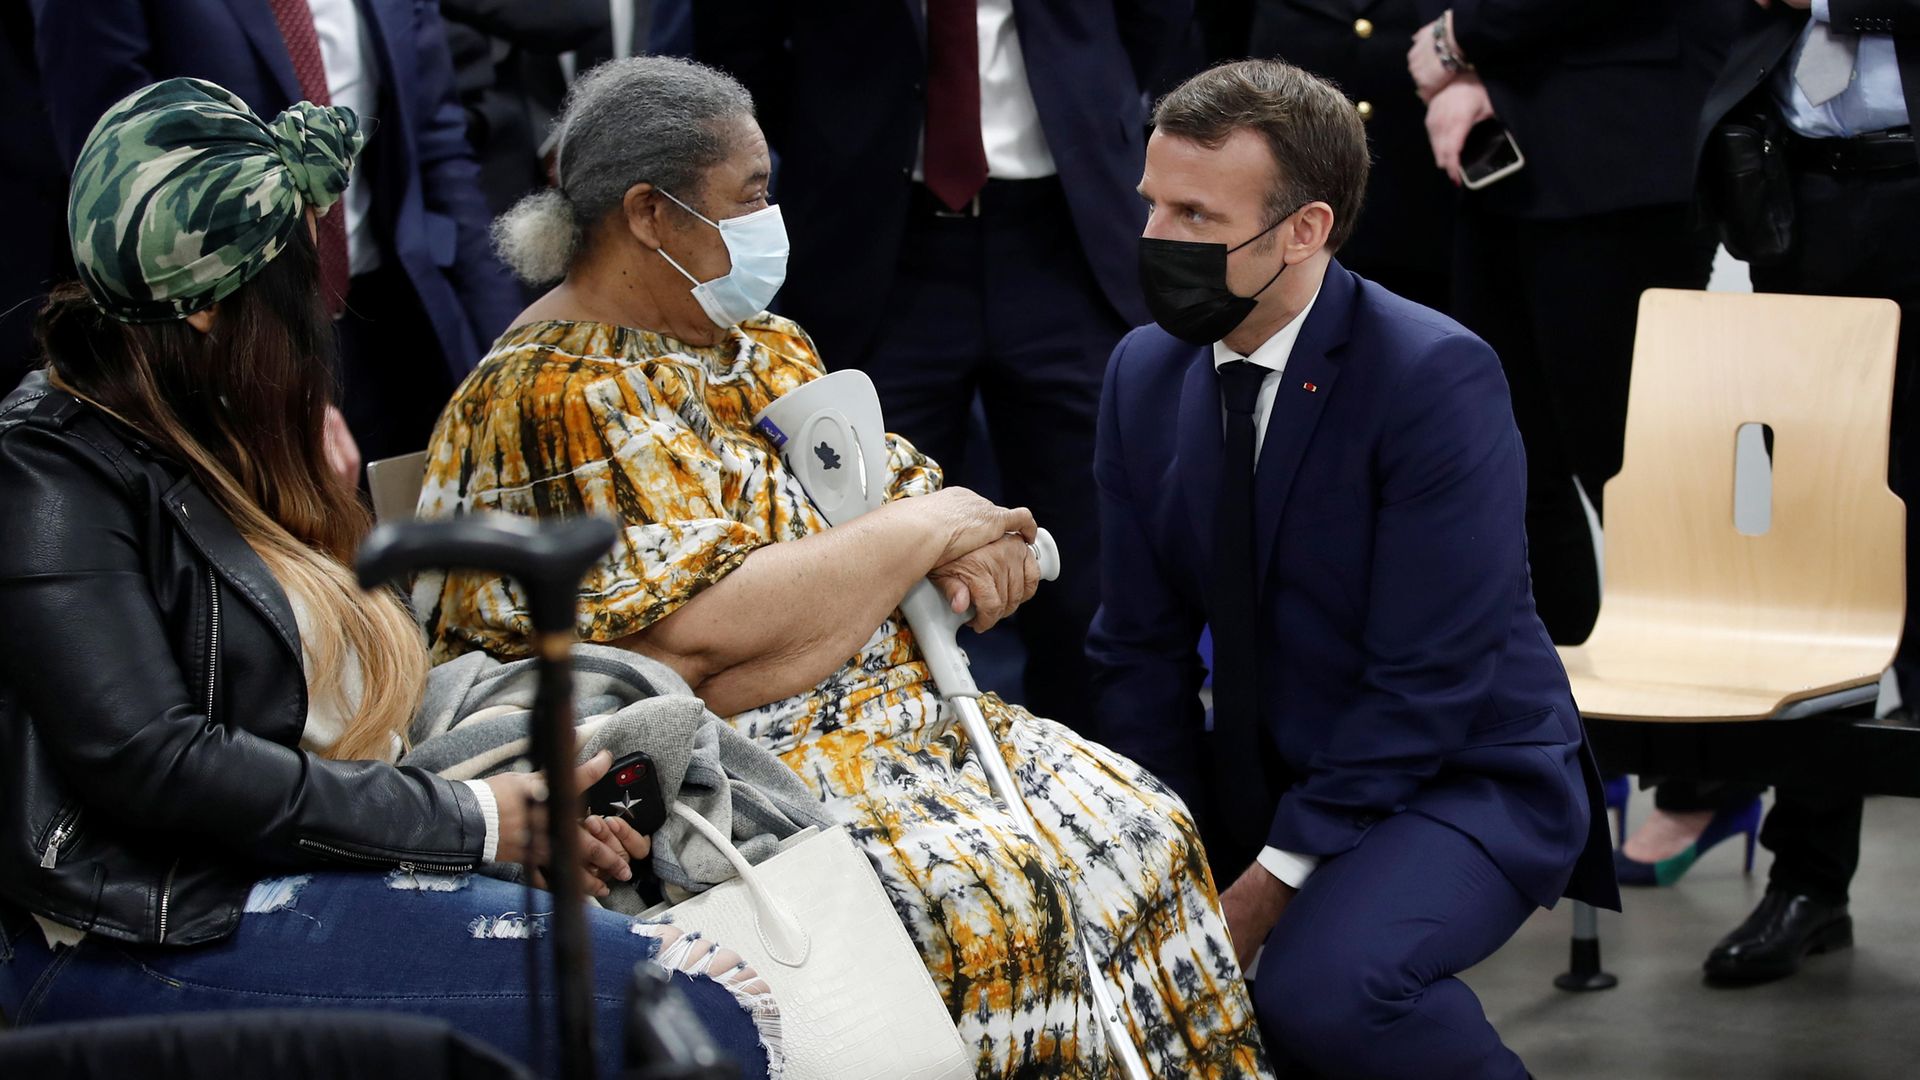 French President Emmanuel Macron, wearing a protective face mask, talks to a patient as he visits a coronavirus vaccination centre - Credit: POOL/AFP via Getty Images